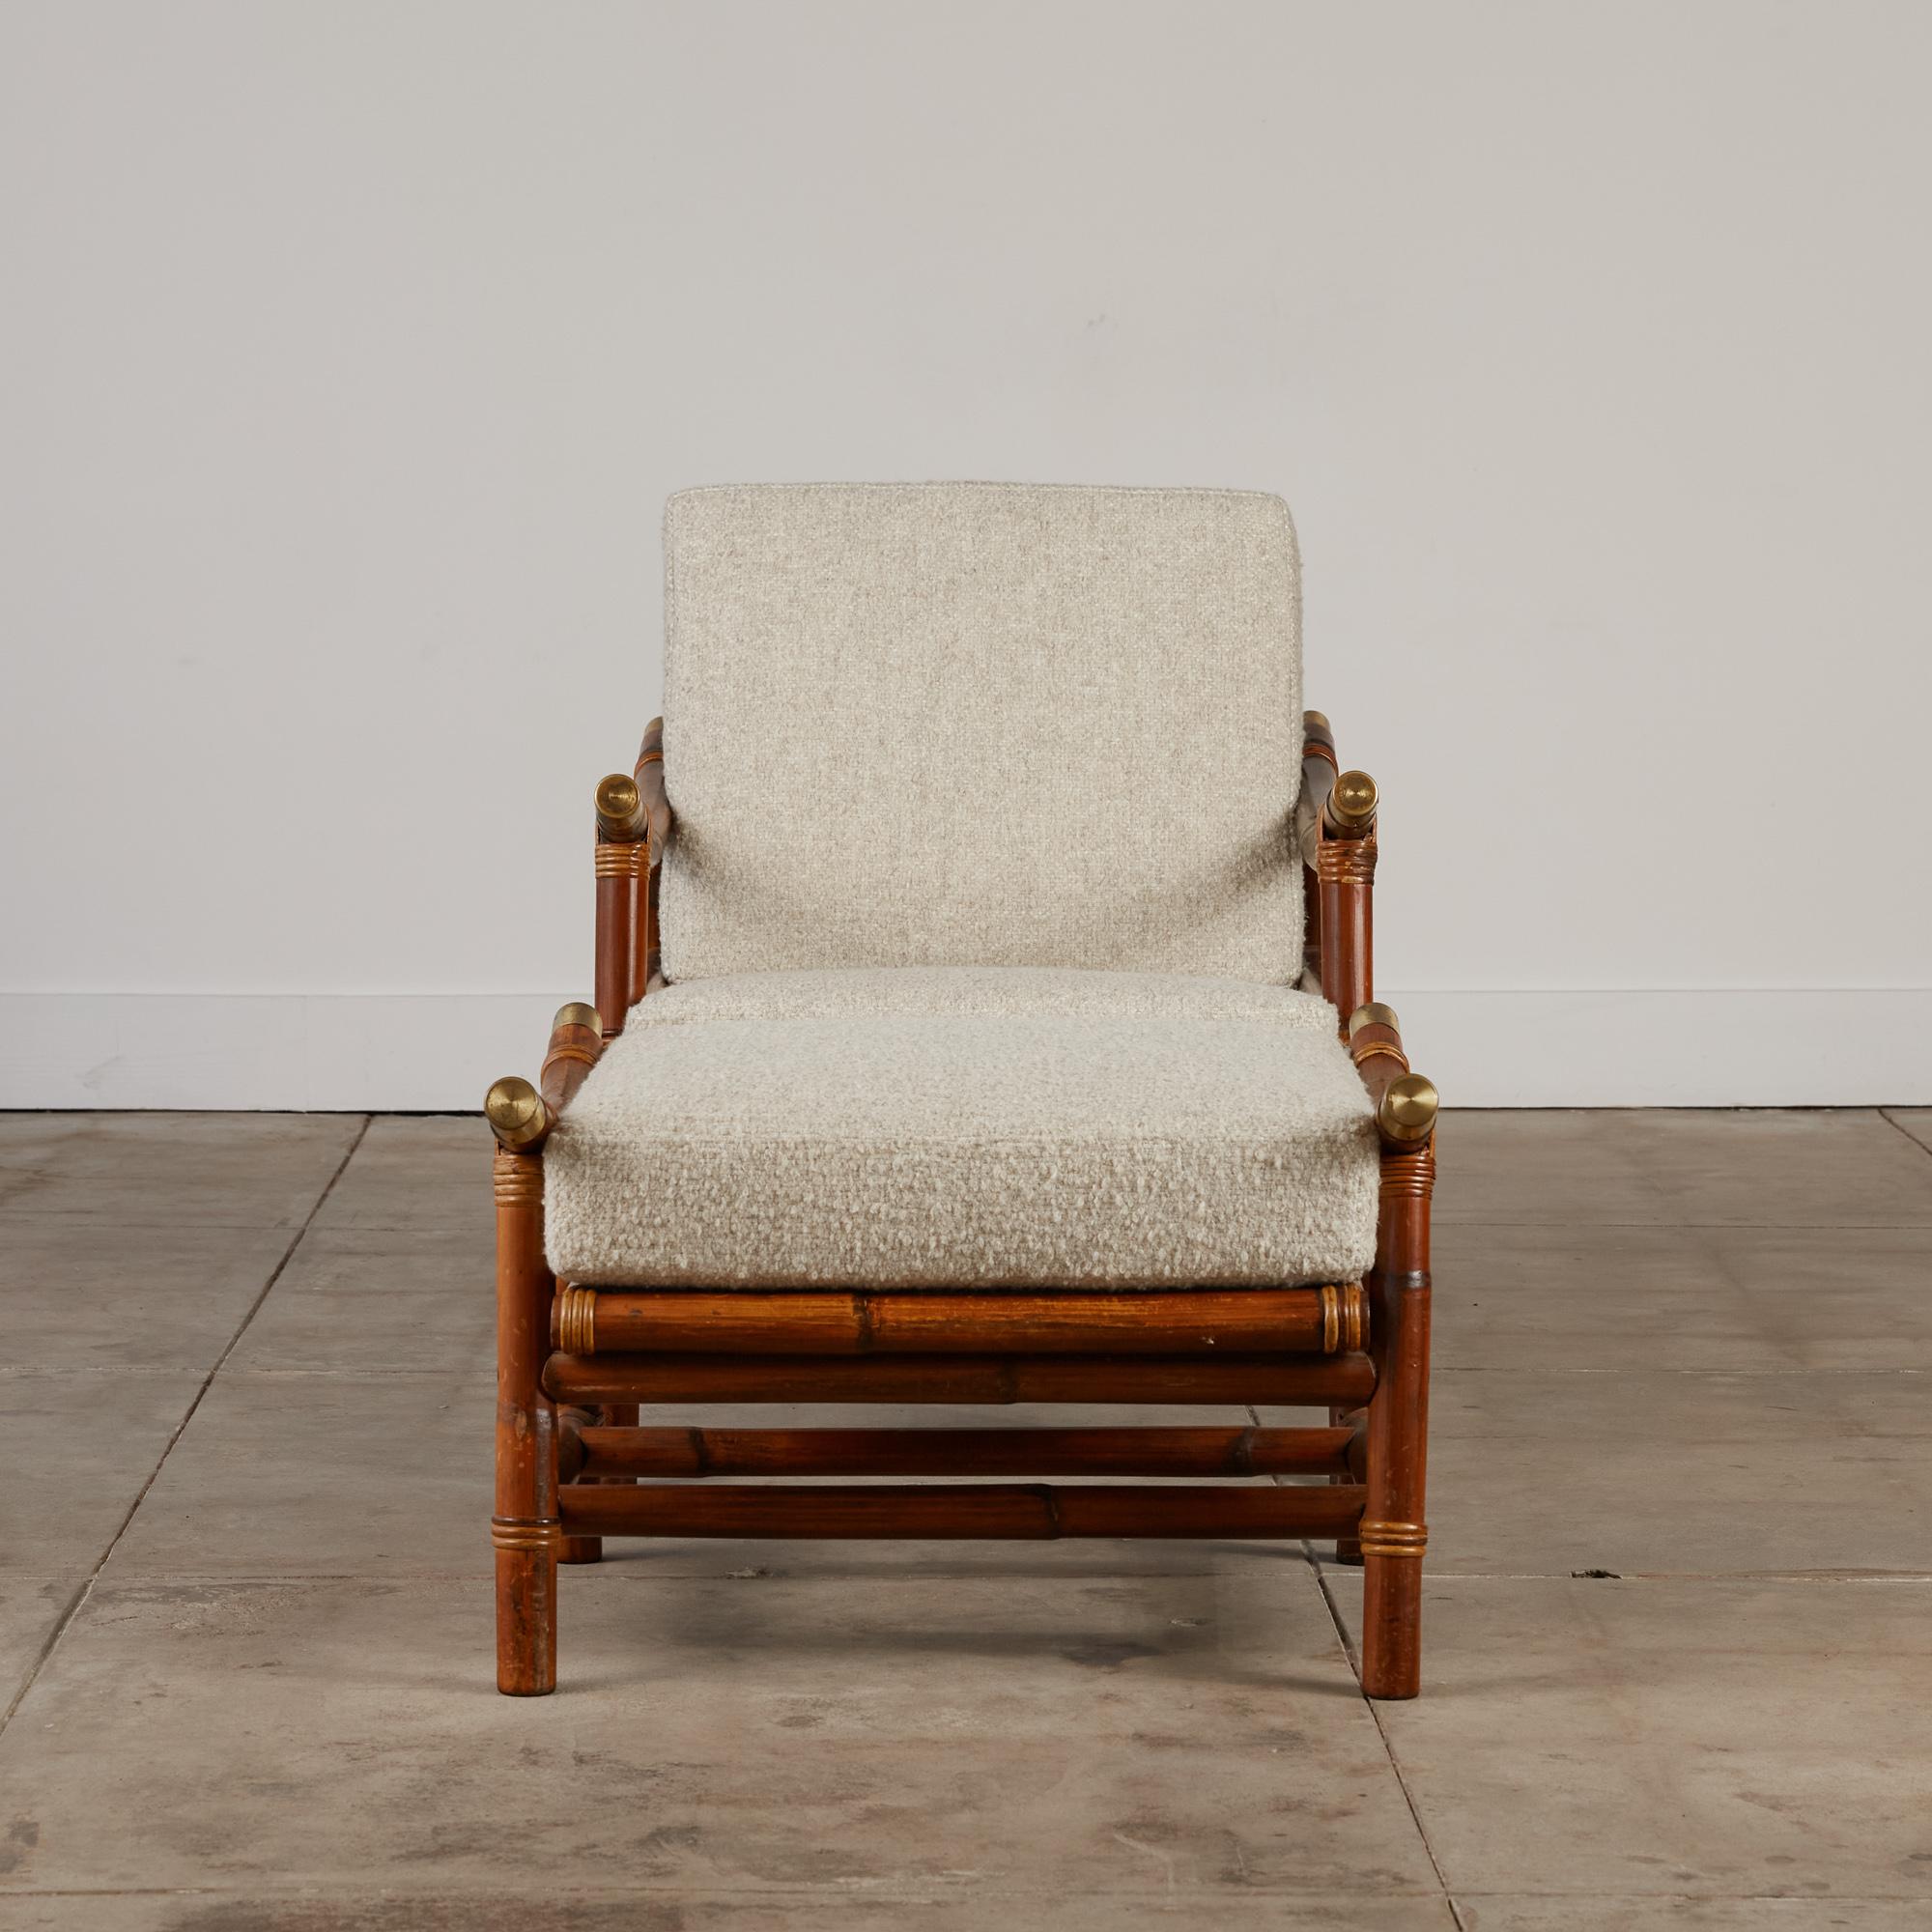 A rattan lounge chair and ottoman by John B. Wisner for Ficks Reed, USA, c.1950s. The frame is made of shaped bamboo and rattan woven around the joints. Brass metal caps dress the ends of the chair's arms adding a little glamour. The cushions are